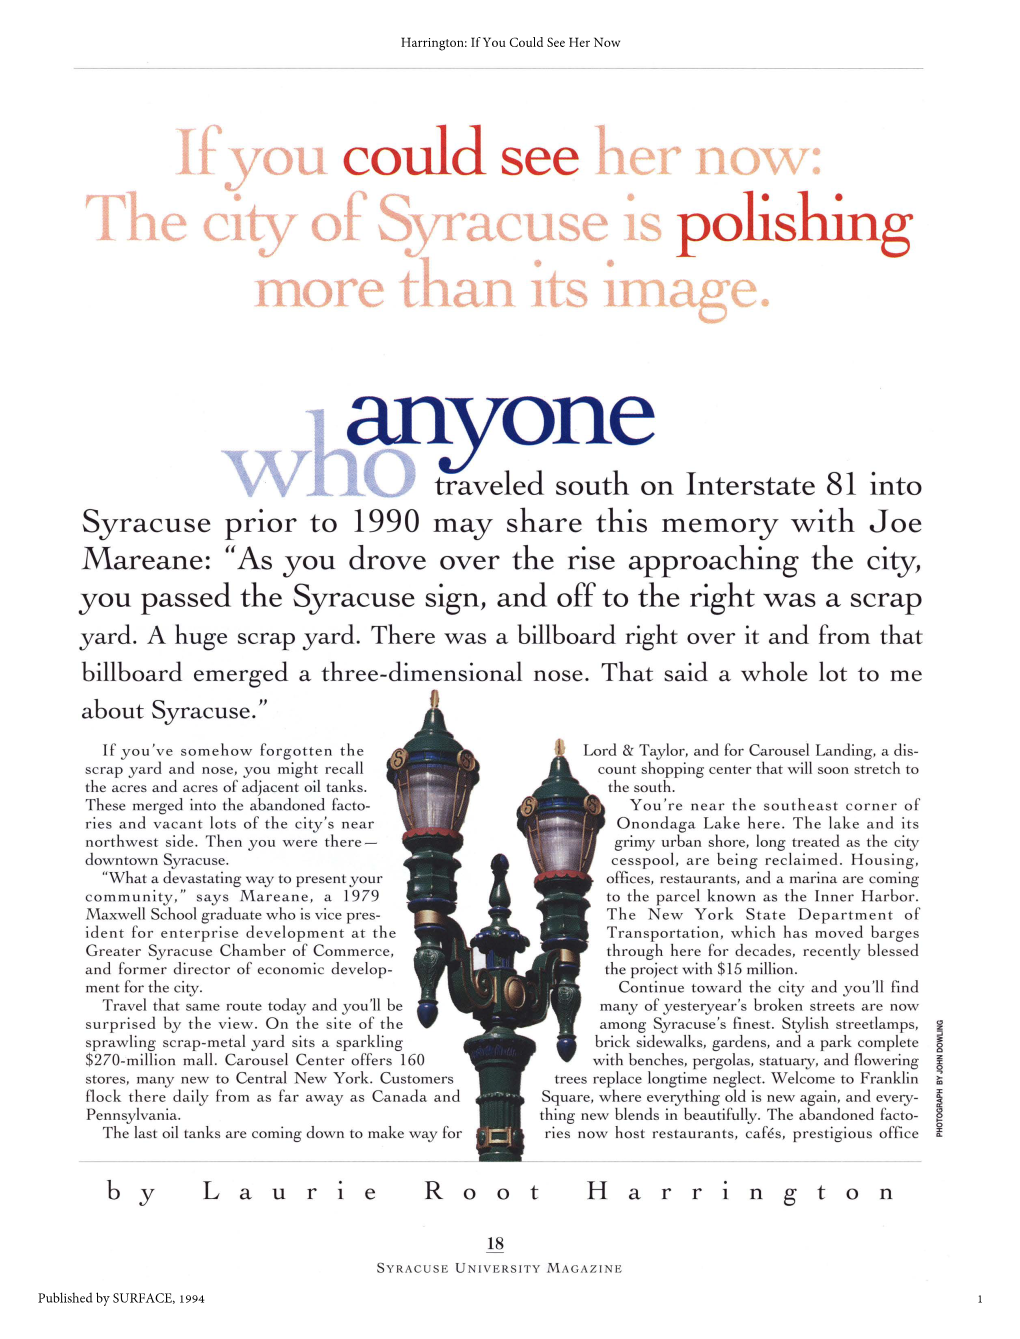 The City of Syracuse Is Polishing More Than Its Image